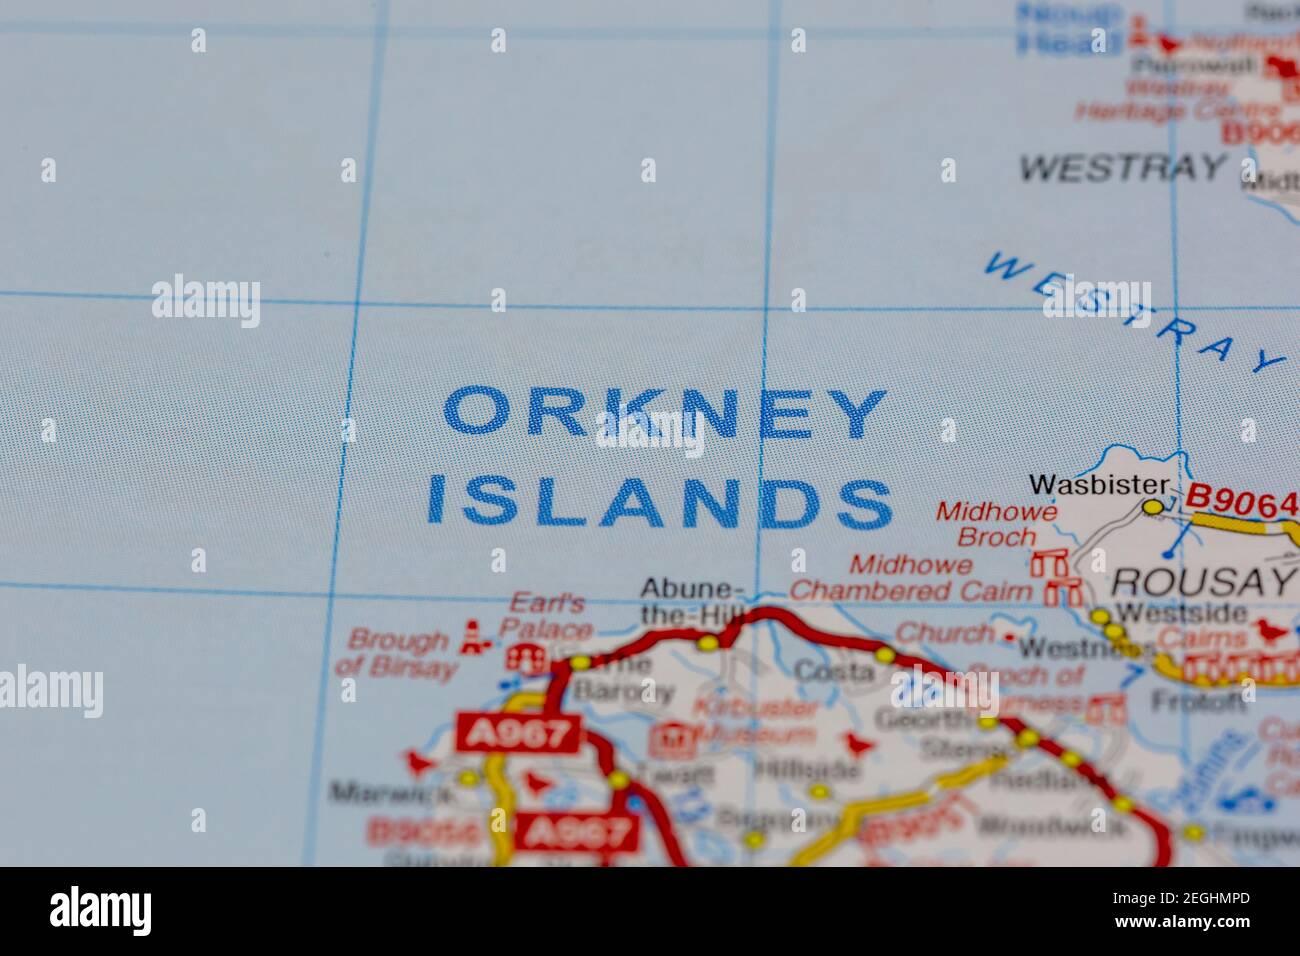 The orkney and surrounding areas shown on a road map or geography map Stock Photo